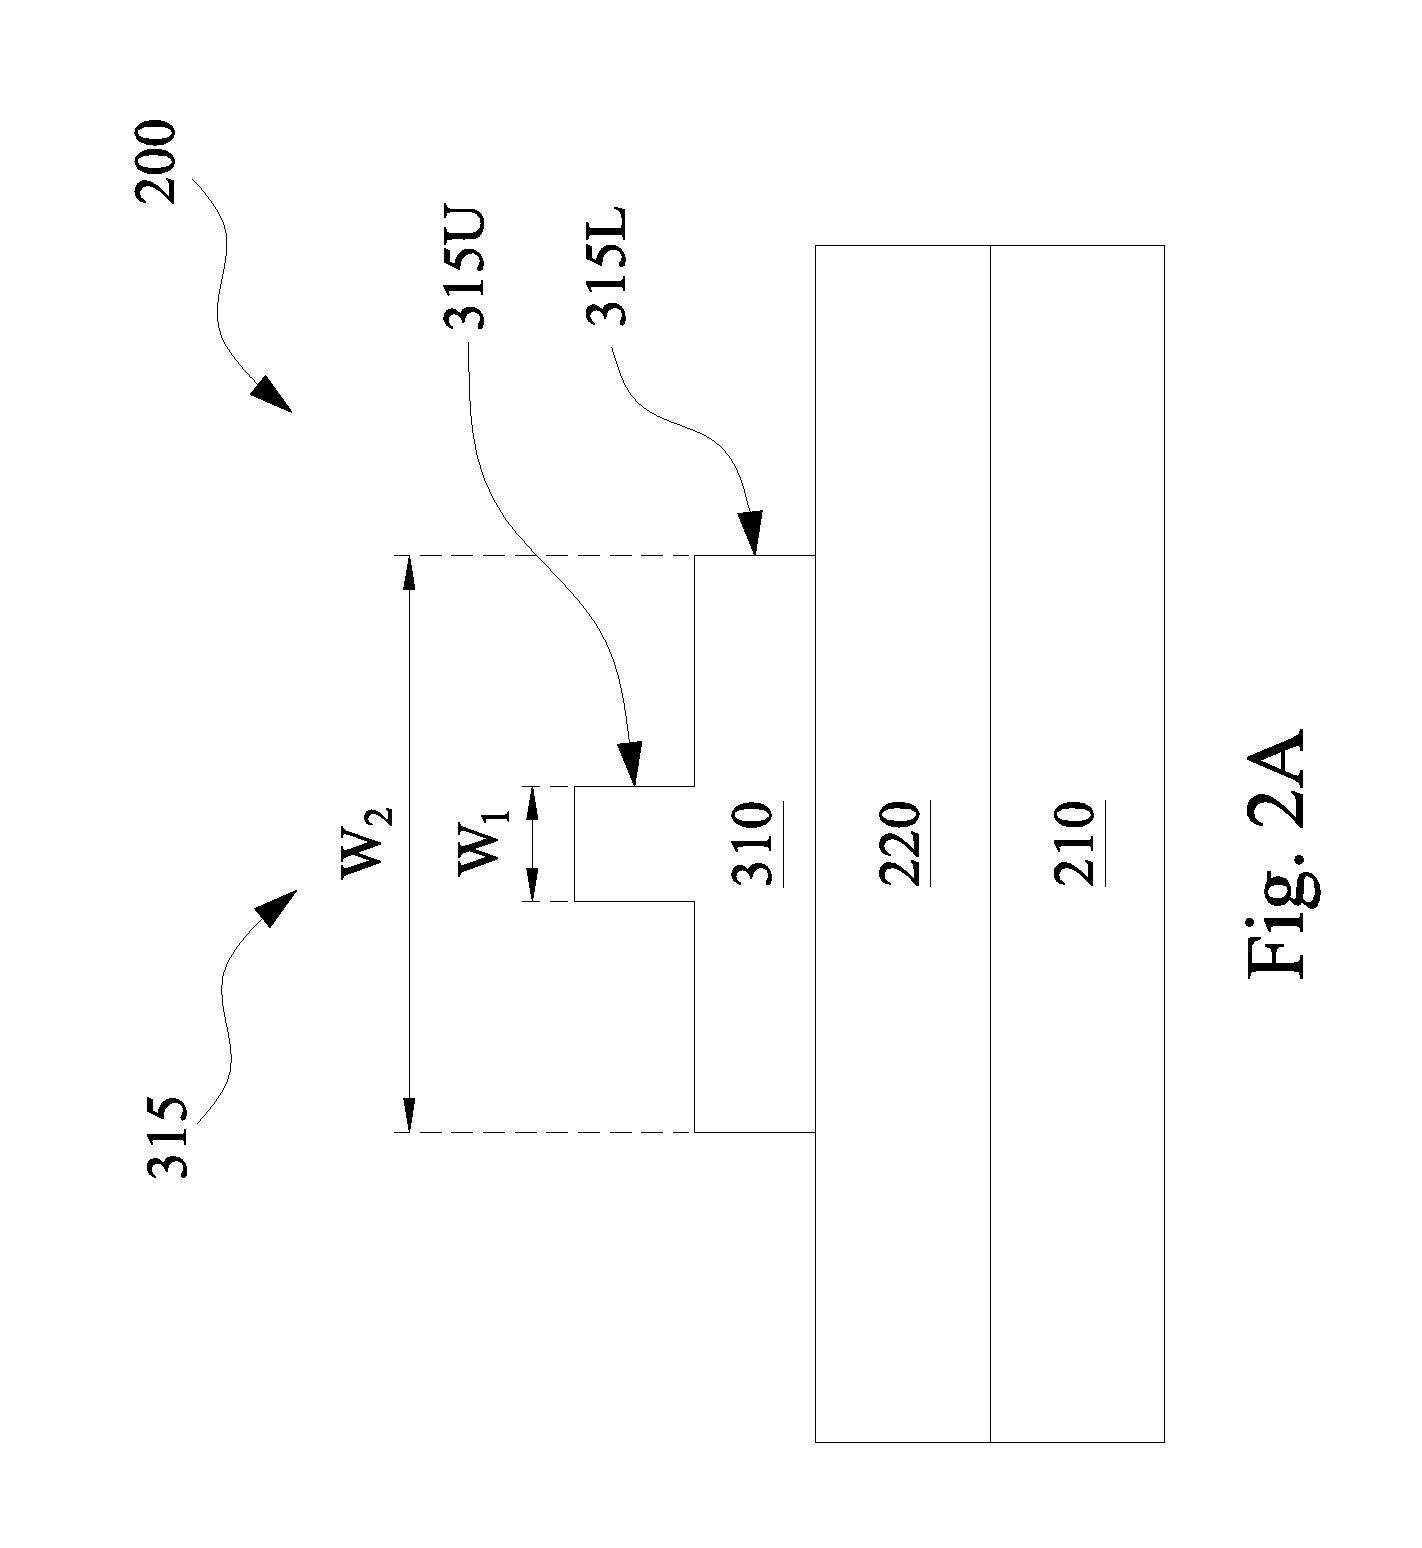 Method of Semiconductor Integrated Circuit Fabrication